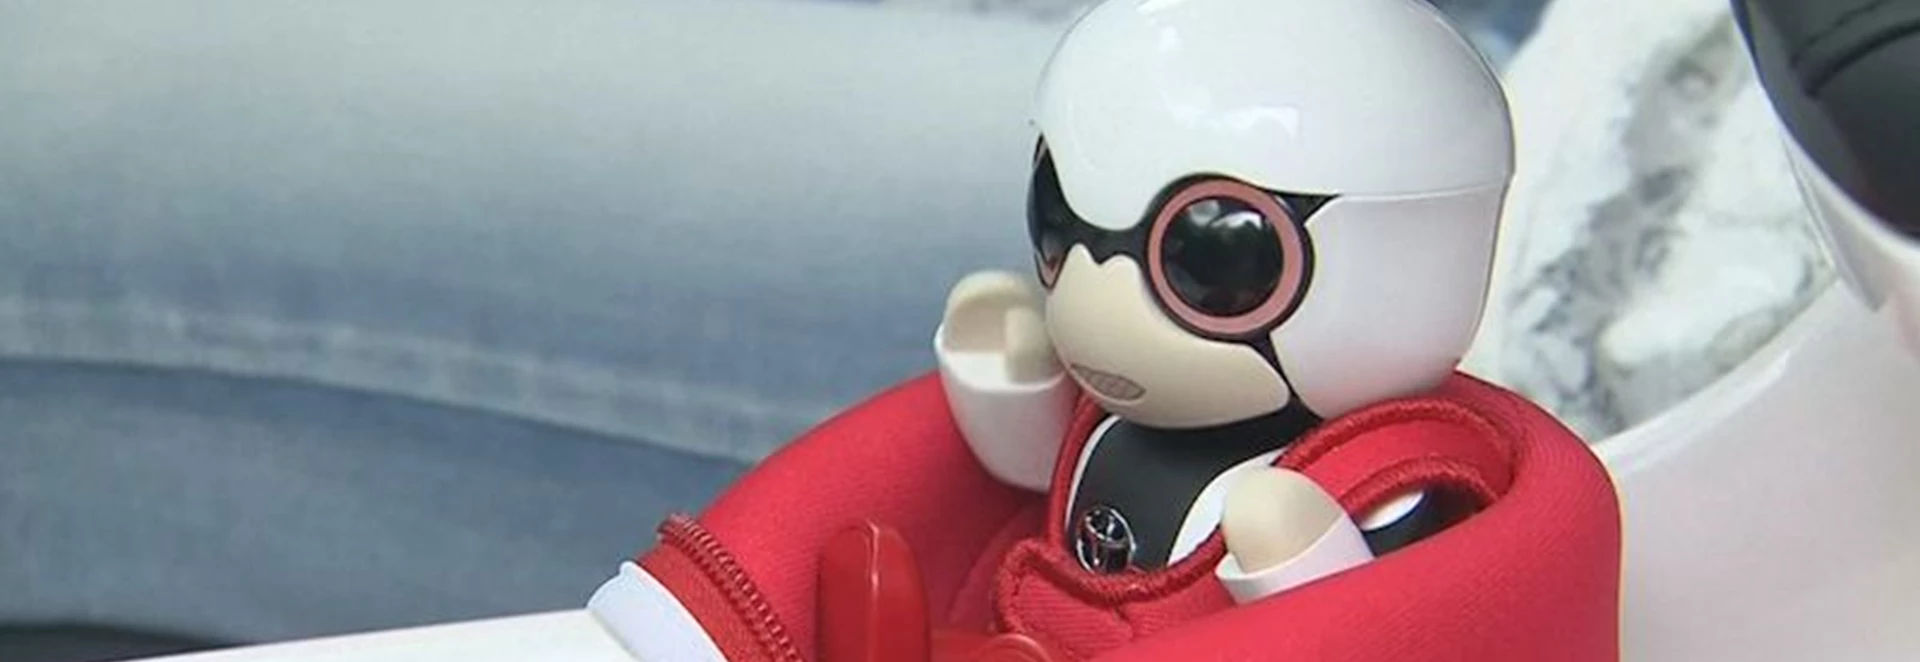 Toyota has made a cute little robot to keep drivers company 